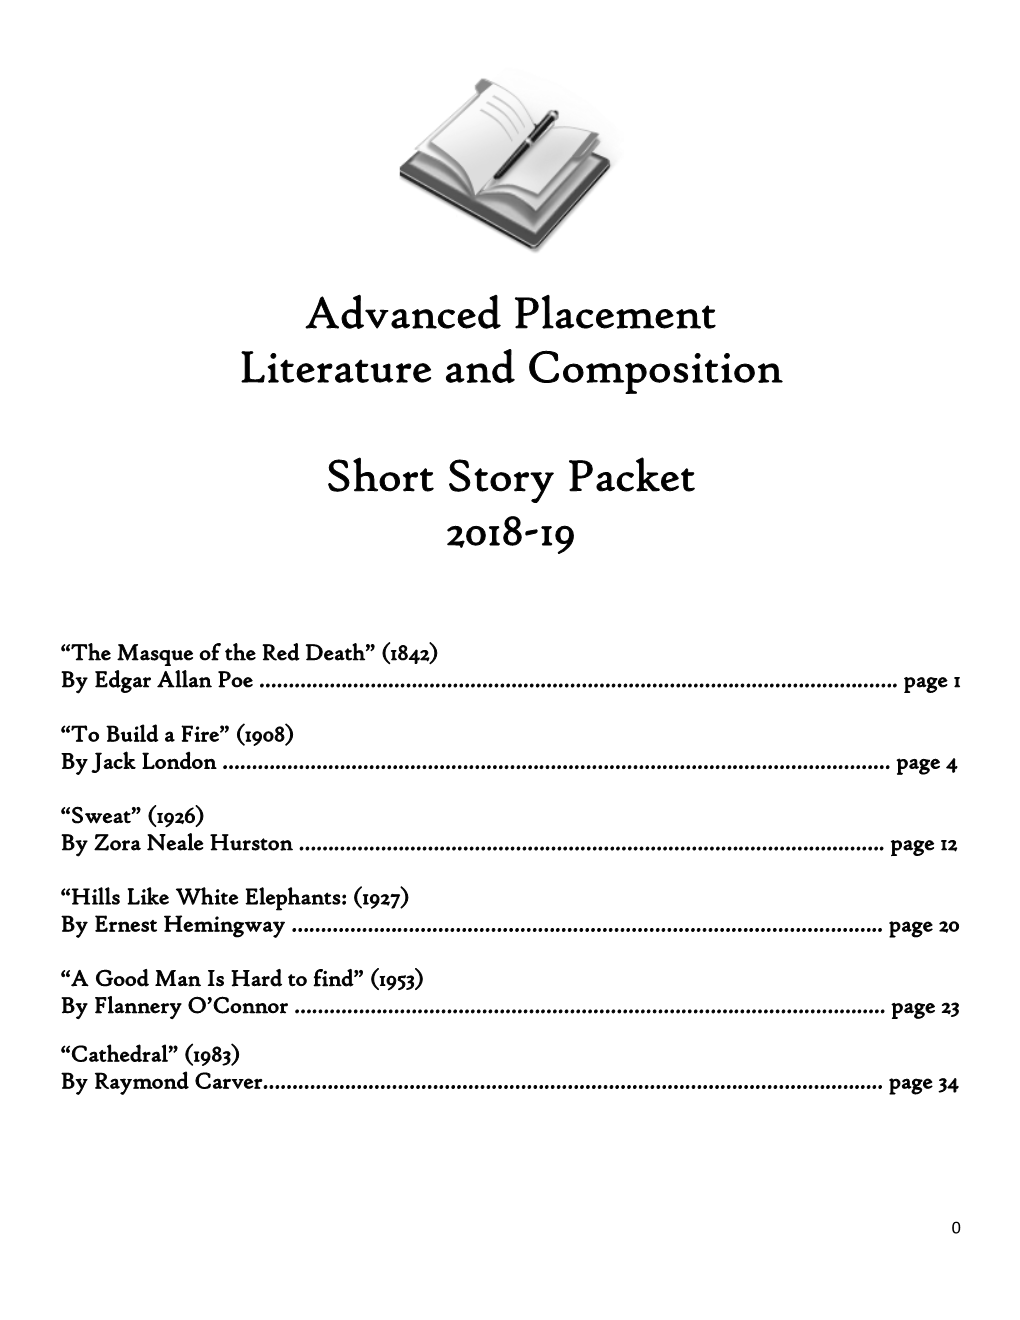 Advanced Placement Literature and Composition Short Story Packet